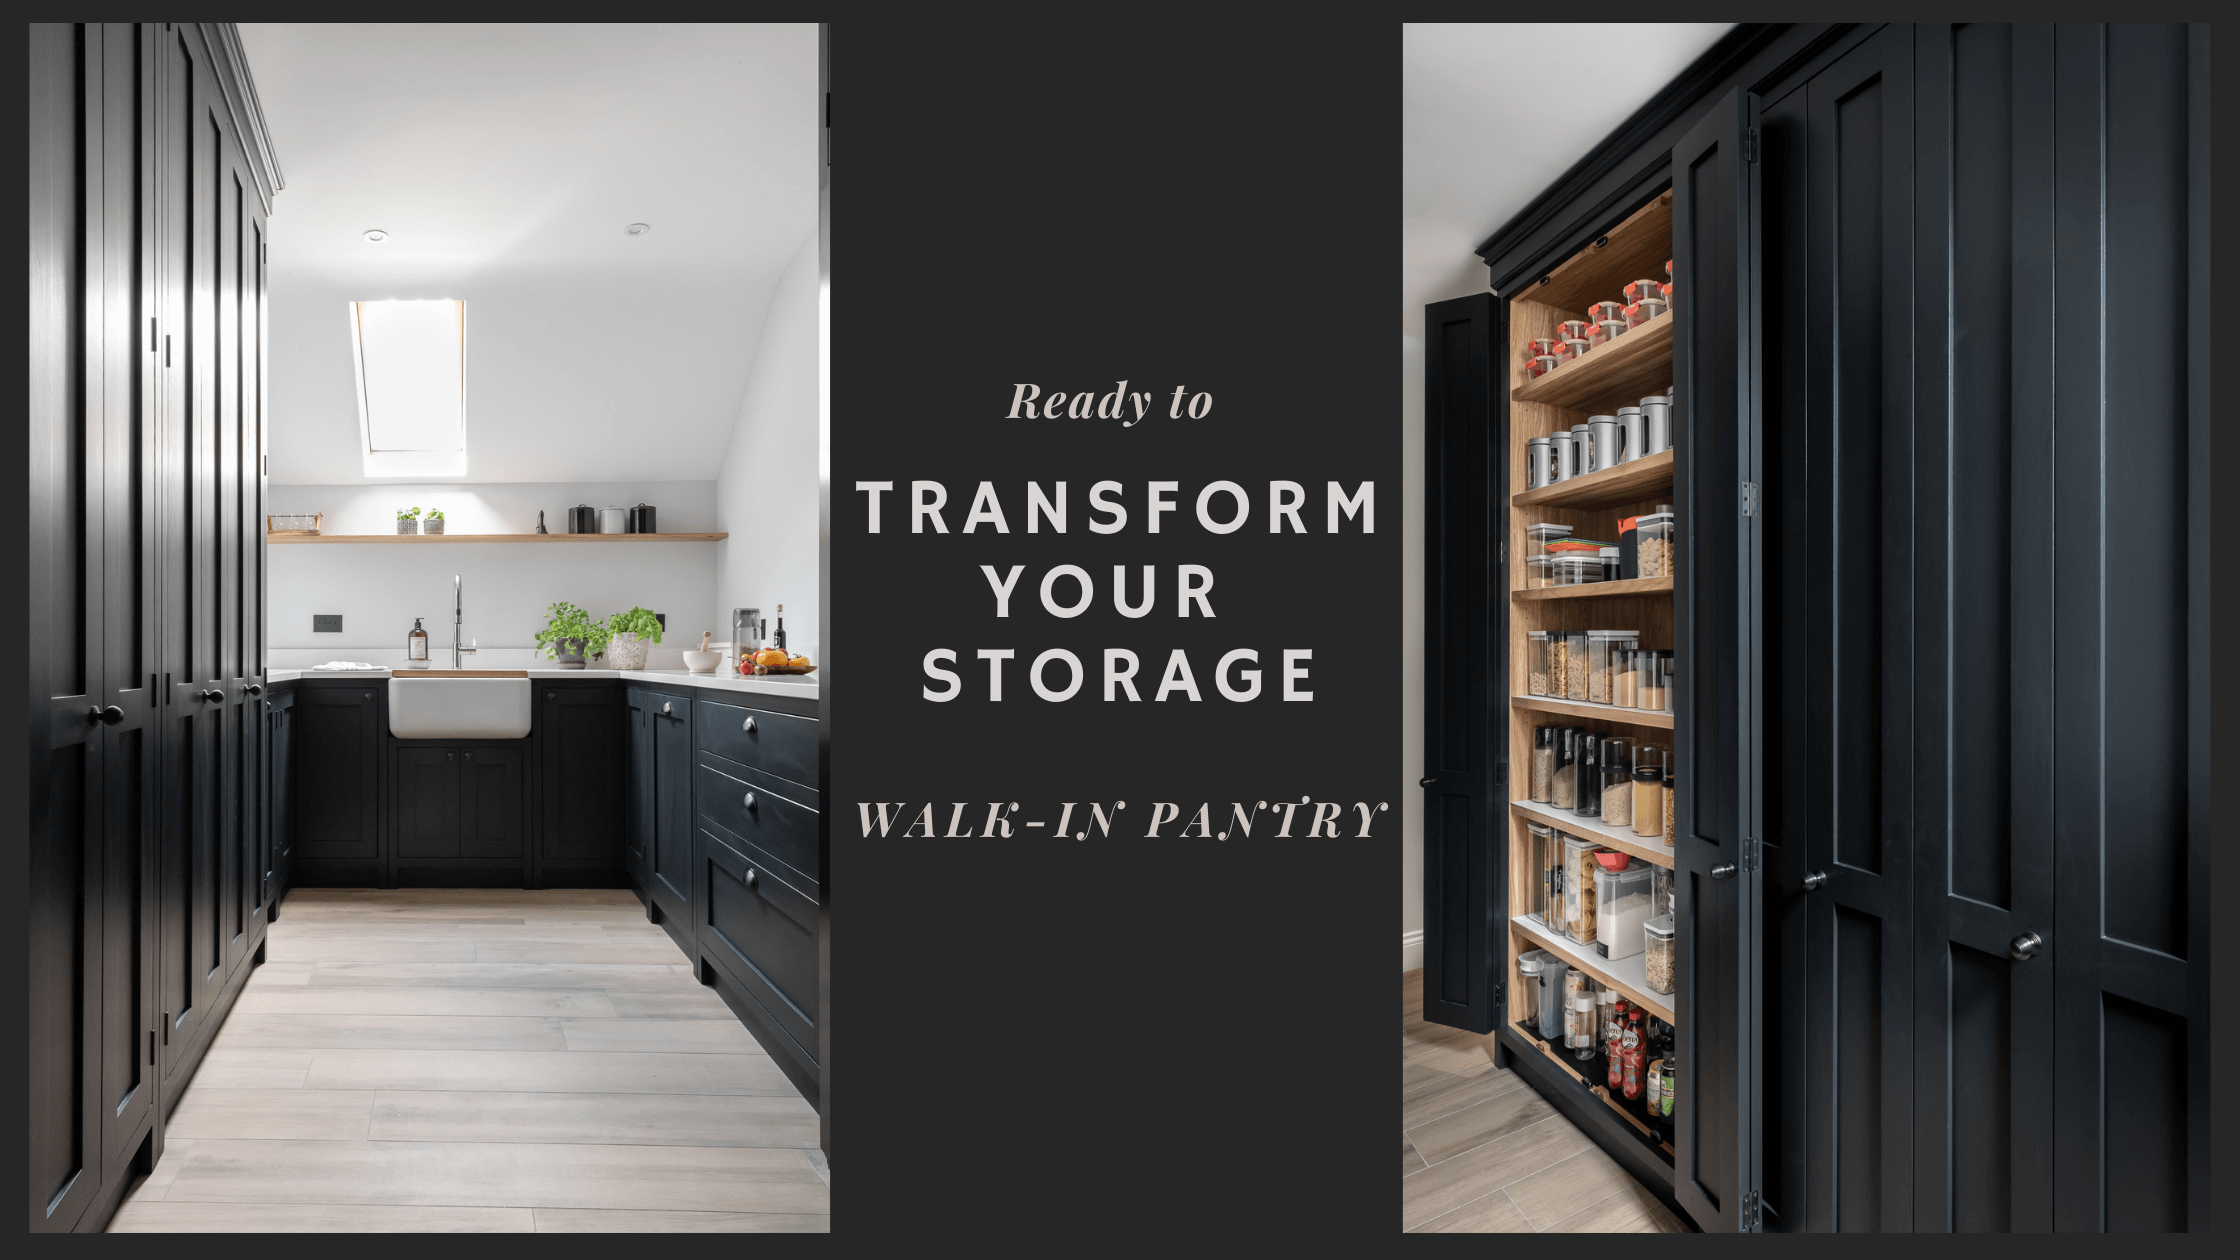 Why we love a Walk-In Pantry